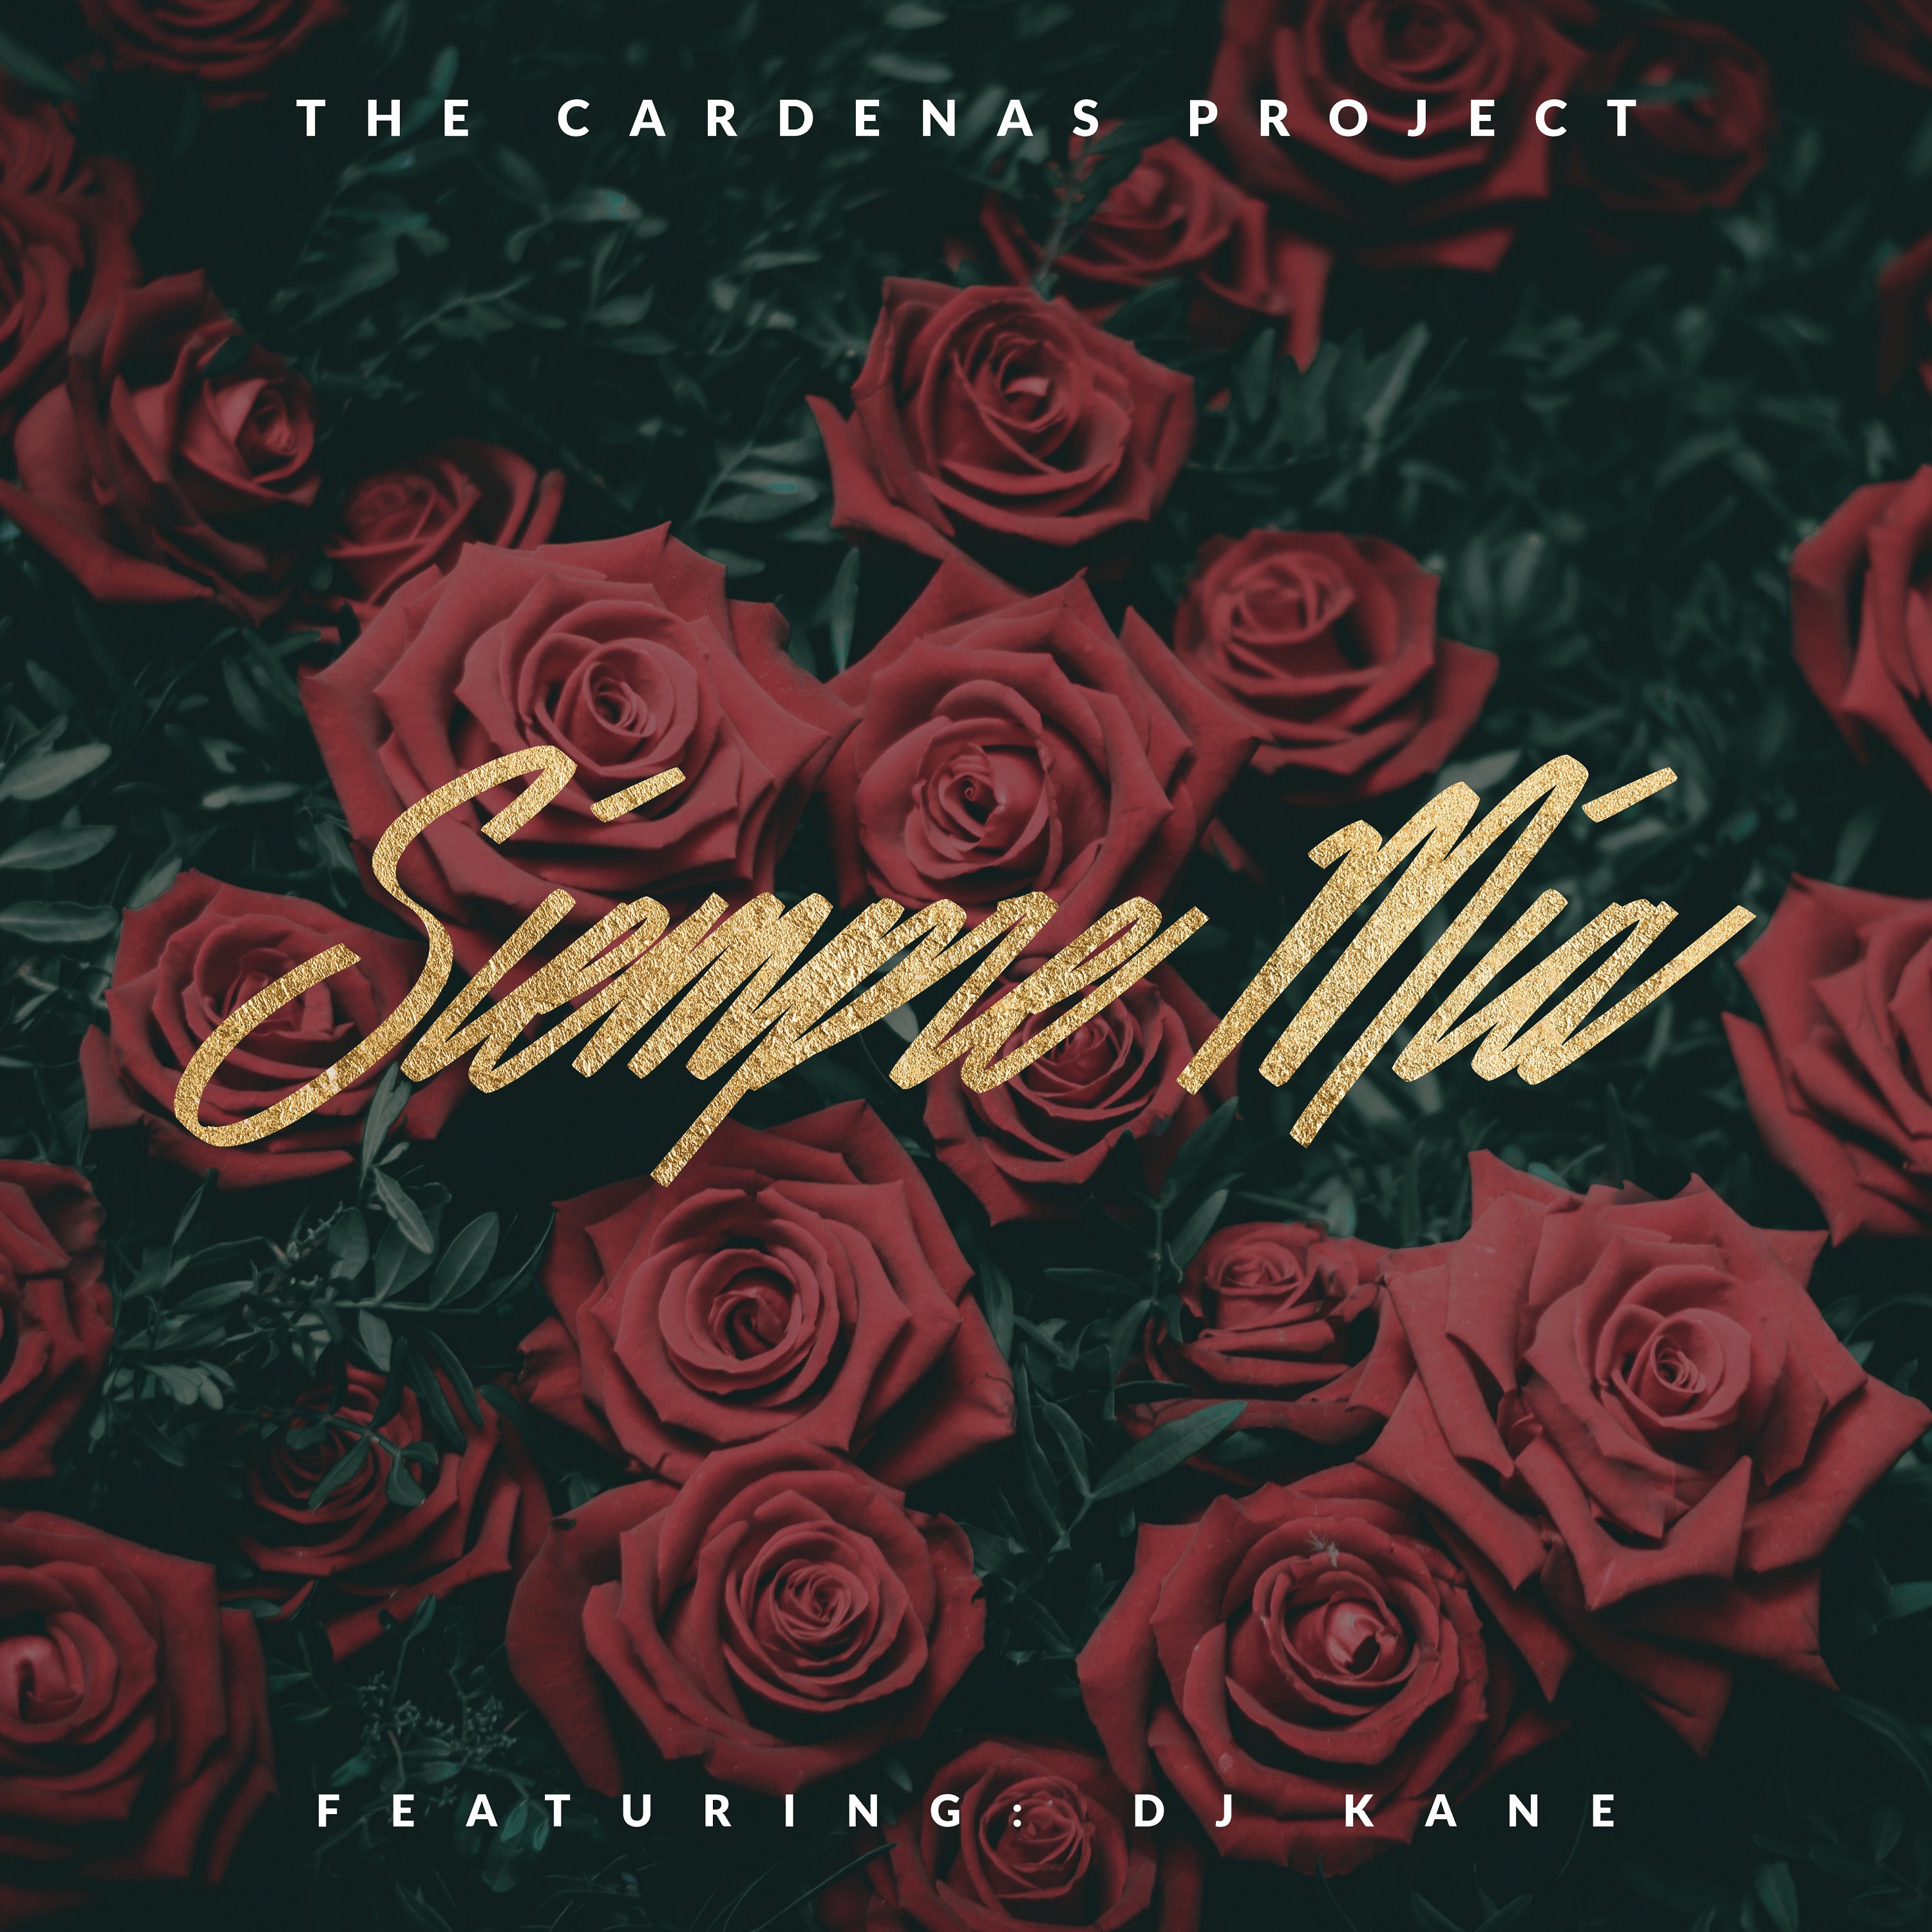 Art for SIEMPRE MIA by THE CARDENAS PROJECT FT. DJ KANE